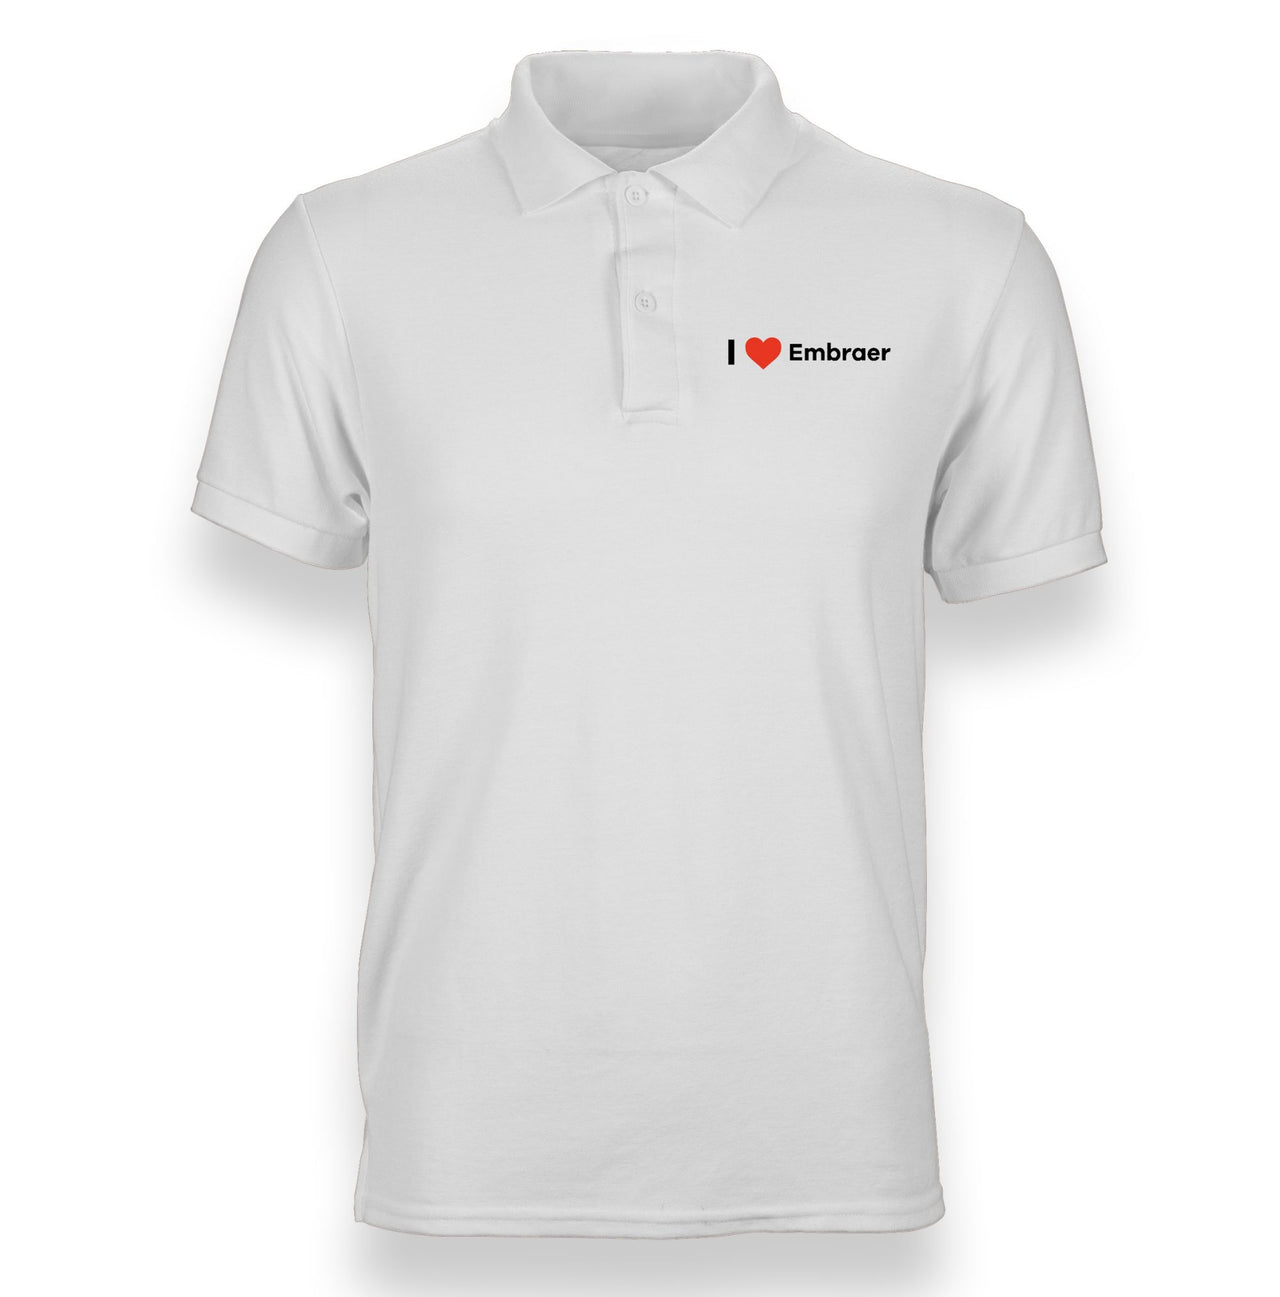 I Love Embraer Designed "WOMEN" Polo T-Shirts